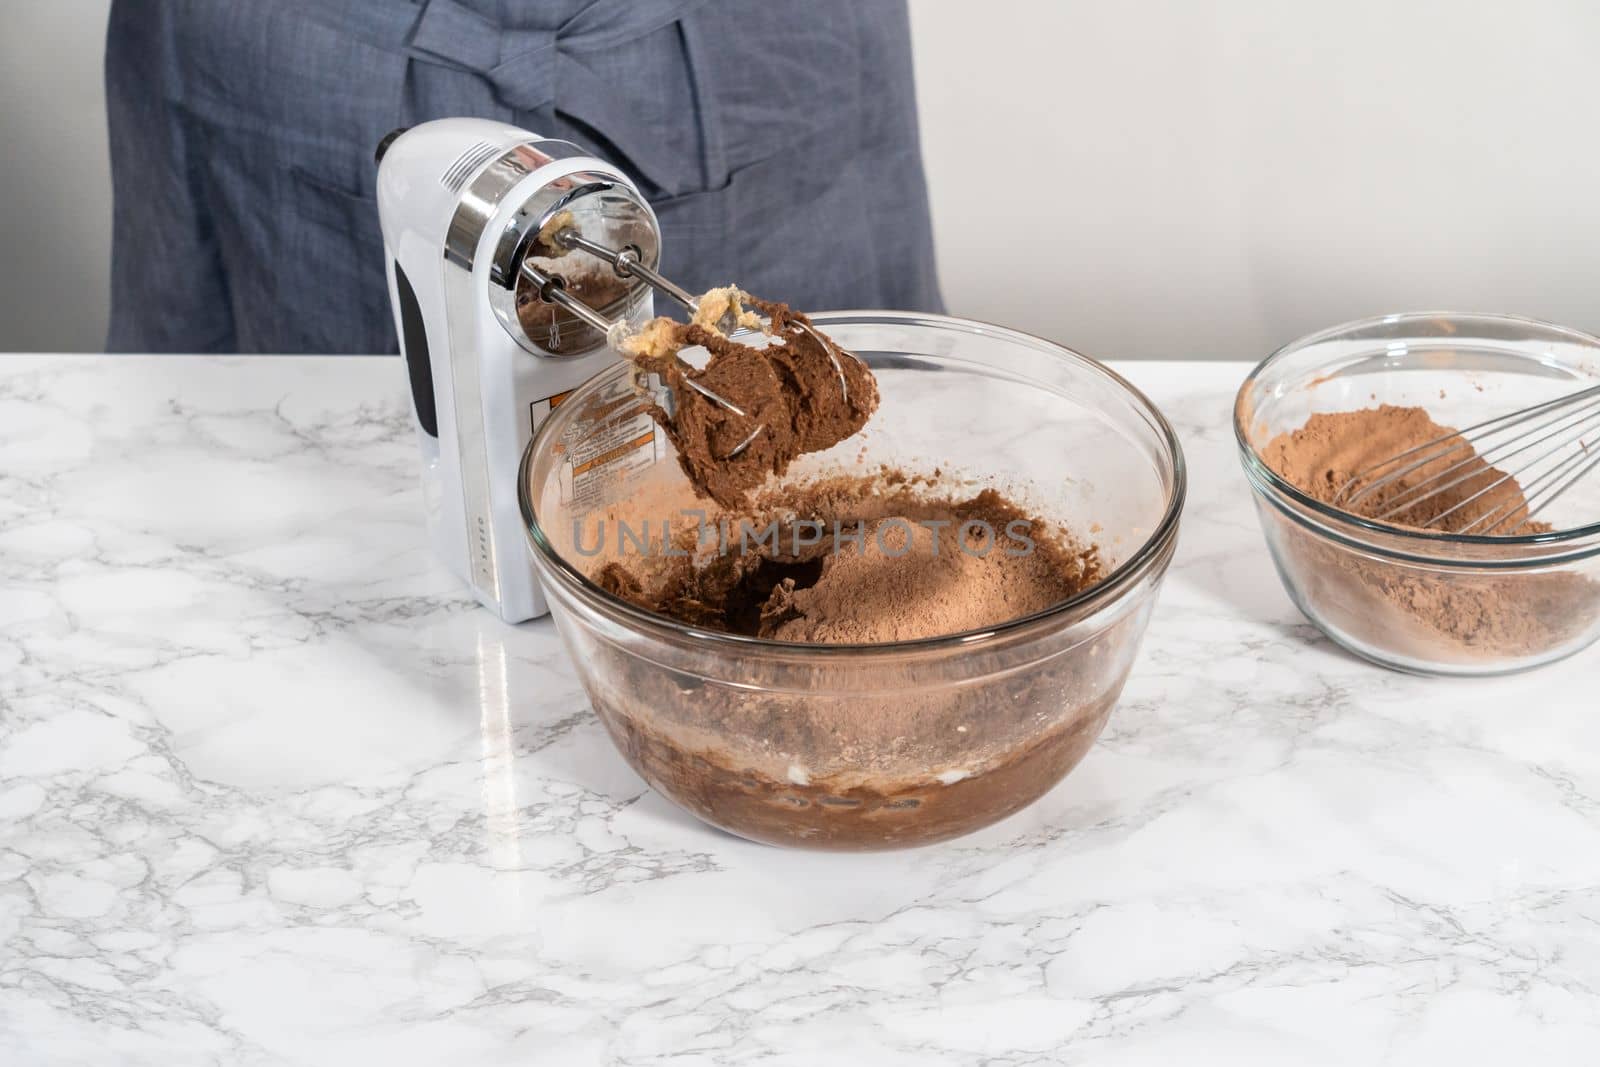 Mixing ingredients with a hand mixer to bake chocolate cookies with chocolate hearts for Valentine's Day.